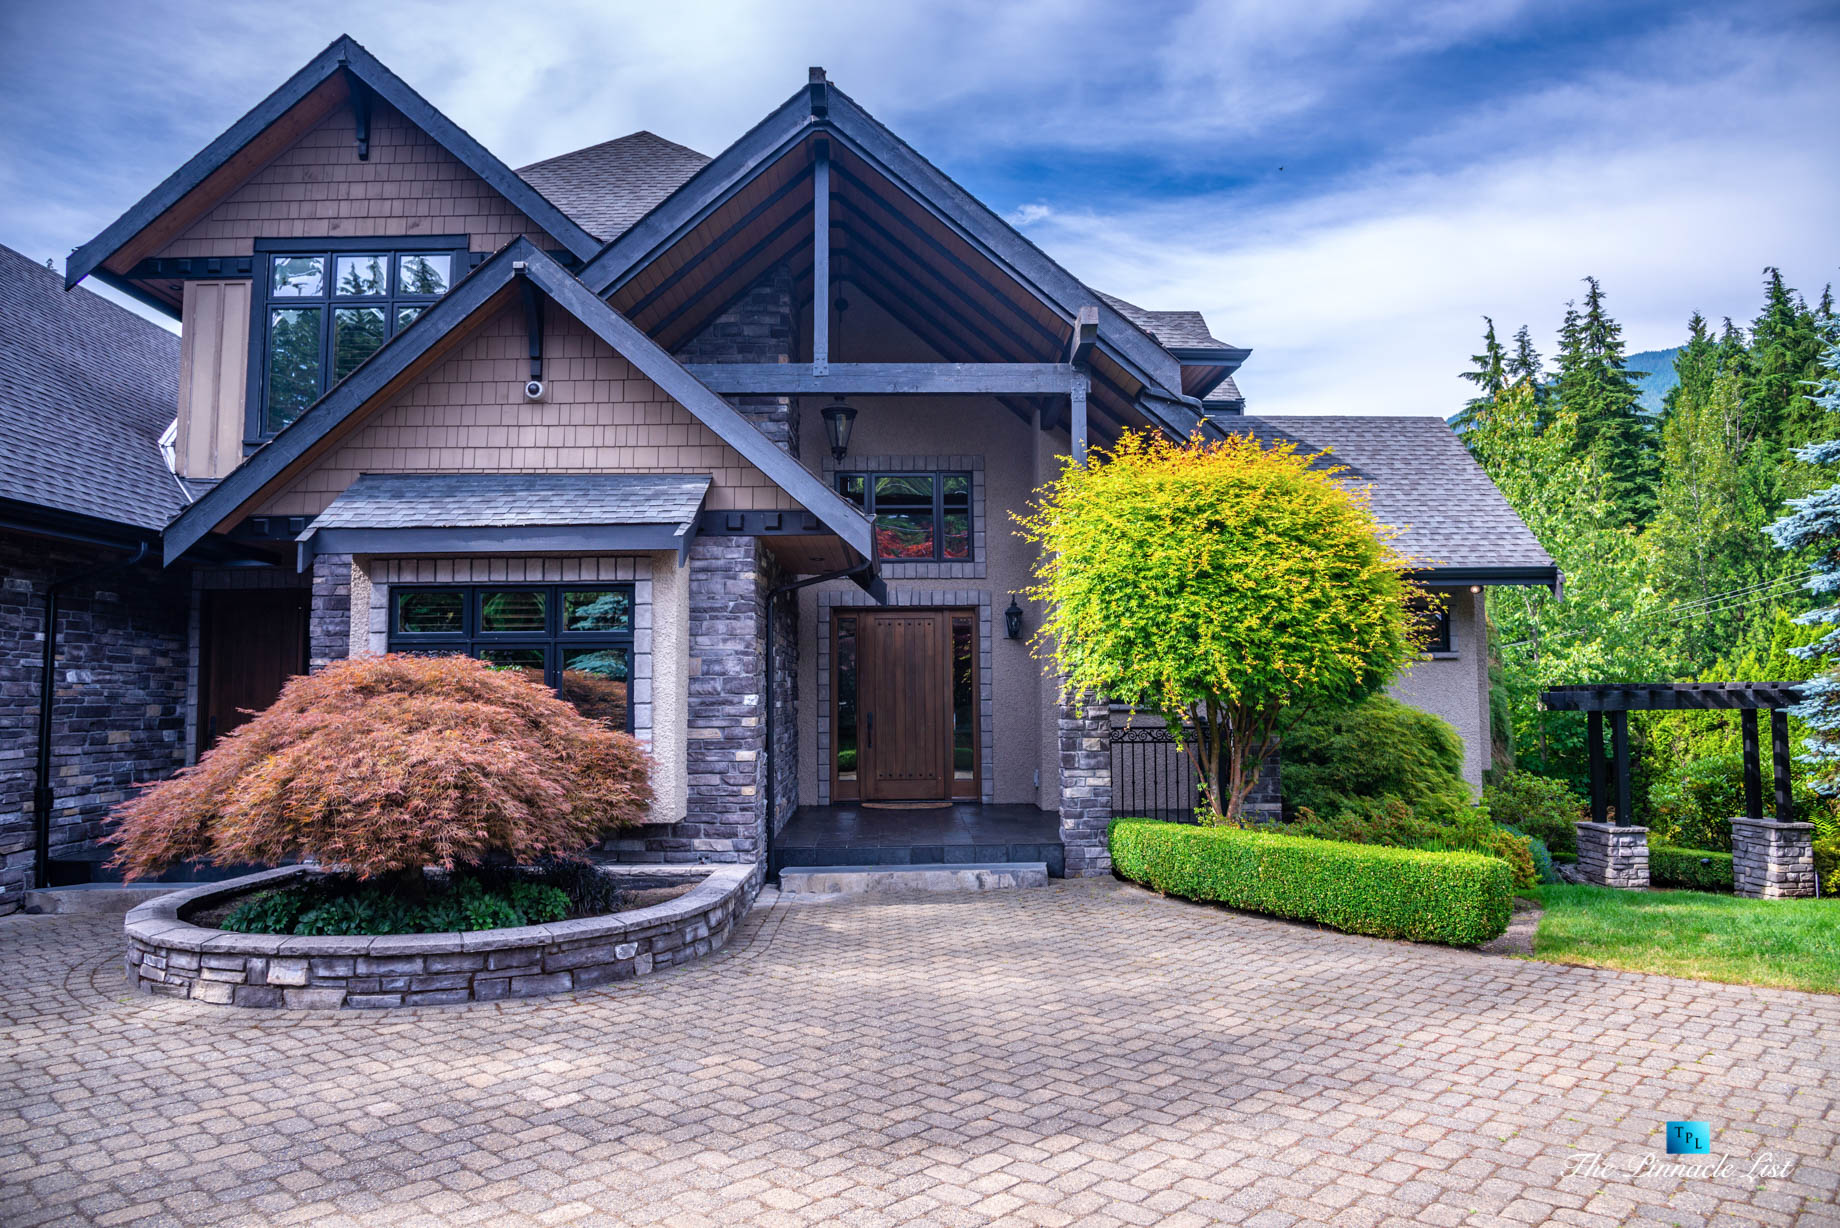 3053 Anmore Creek Way, Anmore, BC, Canada - Front Door - Luxury Real Estate - Greater Vancouver Home